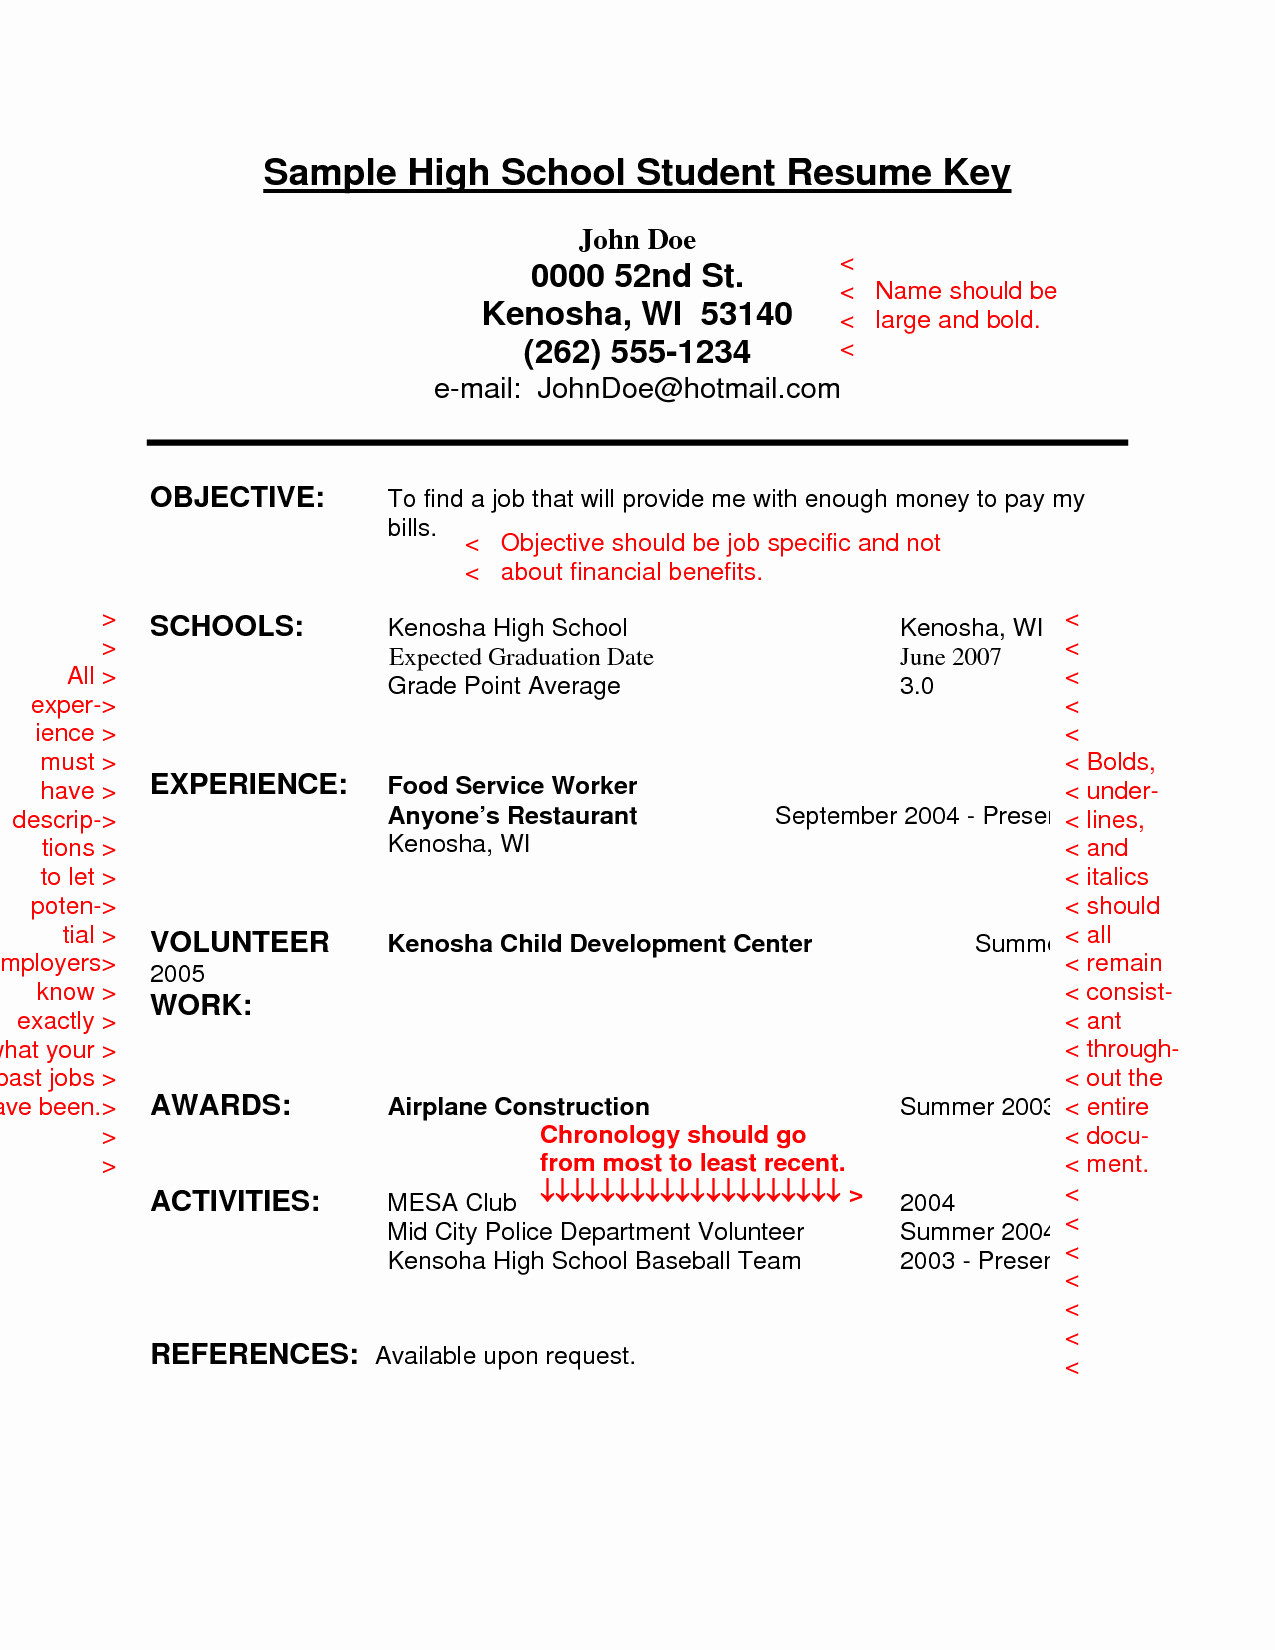 Sample High School Student Resume Awesome Resume Sample for High School Students with No Experience